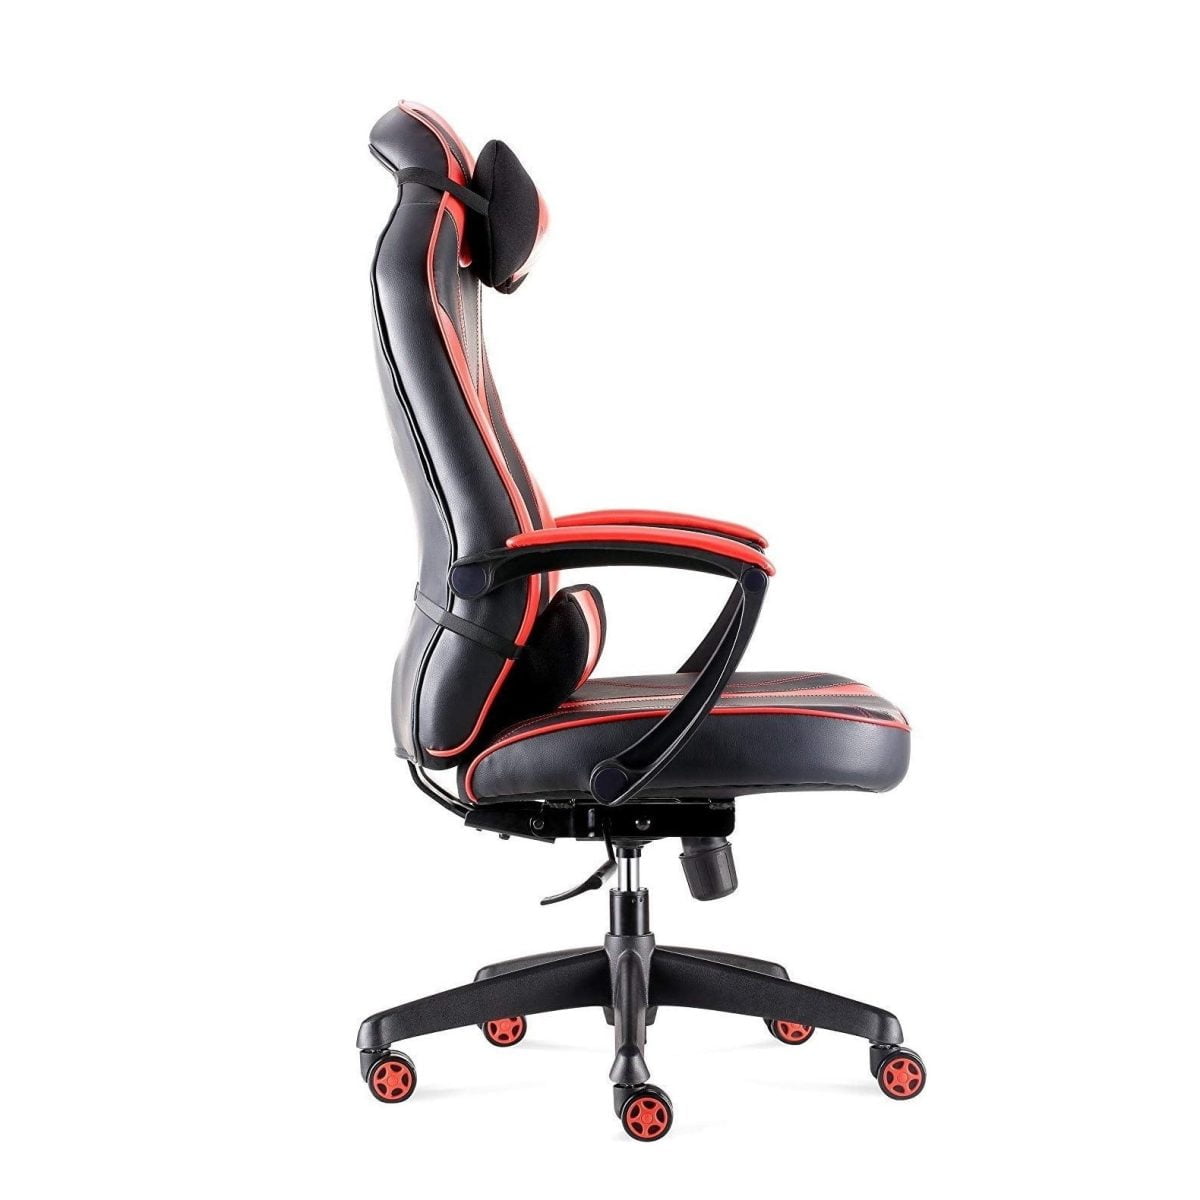 E9Befd052Eb24Eb71844Ae5E50Bf2412 Hi Redragon &Lt;H1 Class=&Quot;Product-Title-H1&Quot;&Gt;Redragon Metis Gaming Chair C102 Black Red&Lt;/H1&Gt; &Lt;Strong&Gt;Specifications:&Lt;/Strong&Gt; Ergonomic Computer Chair Provide Extra Comfortable, Kinsal Upgarded Size Of Seat 360 Degree Swivel, 90 To 180 Degree Backwards Movement 140 Degree Of Lying Down Angle Gaming Chair Redragon Gaming Chair C102 Black Red